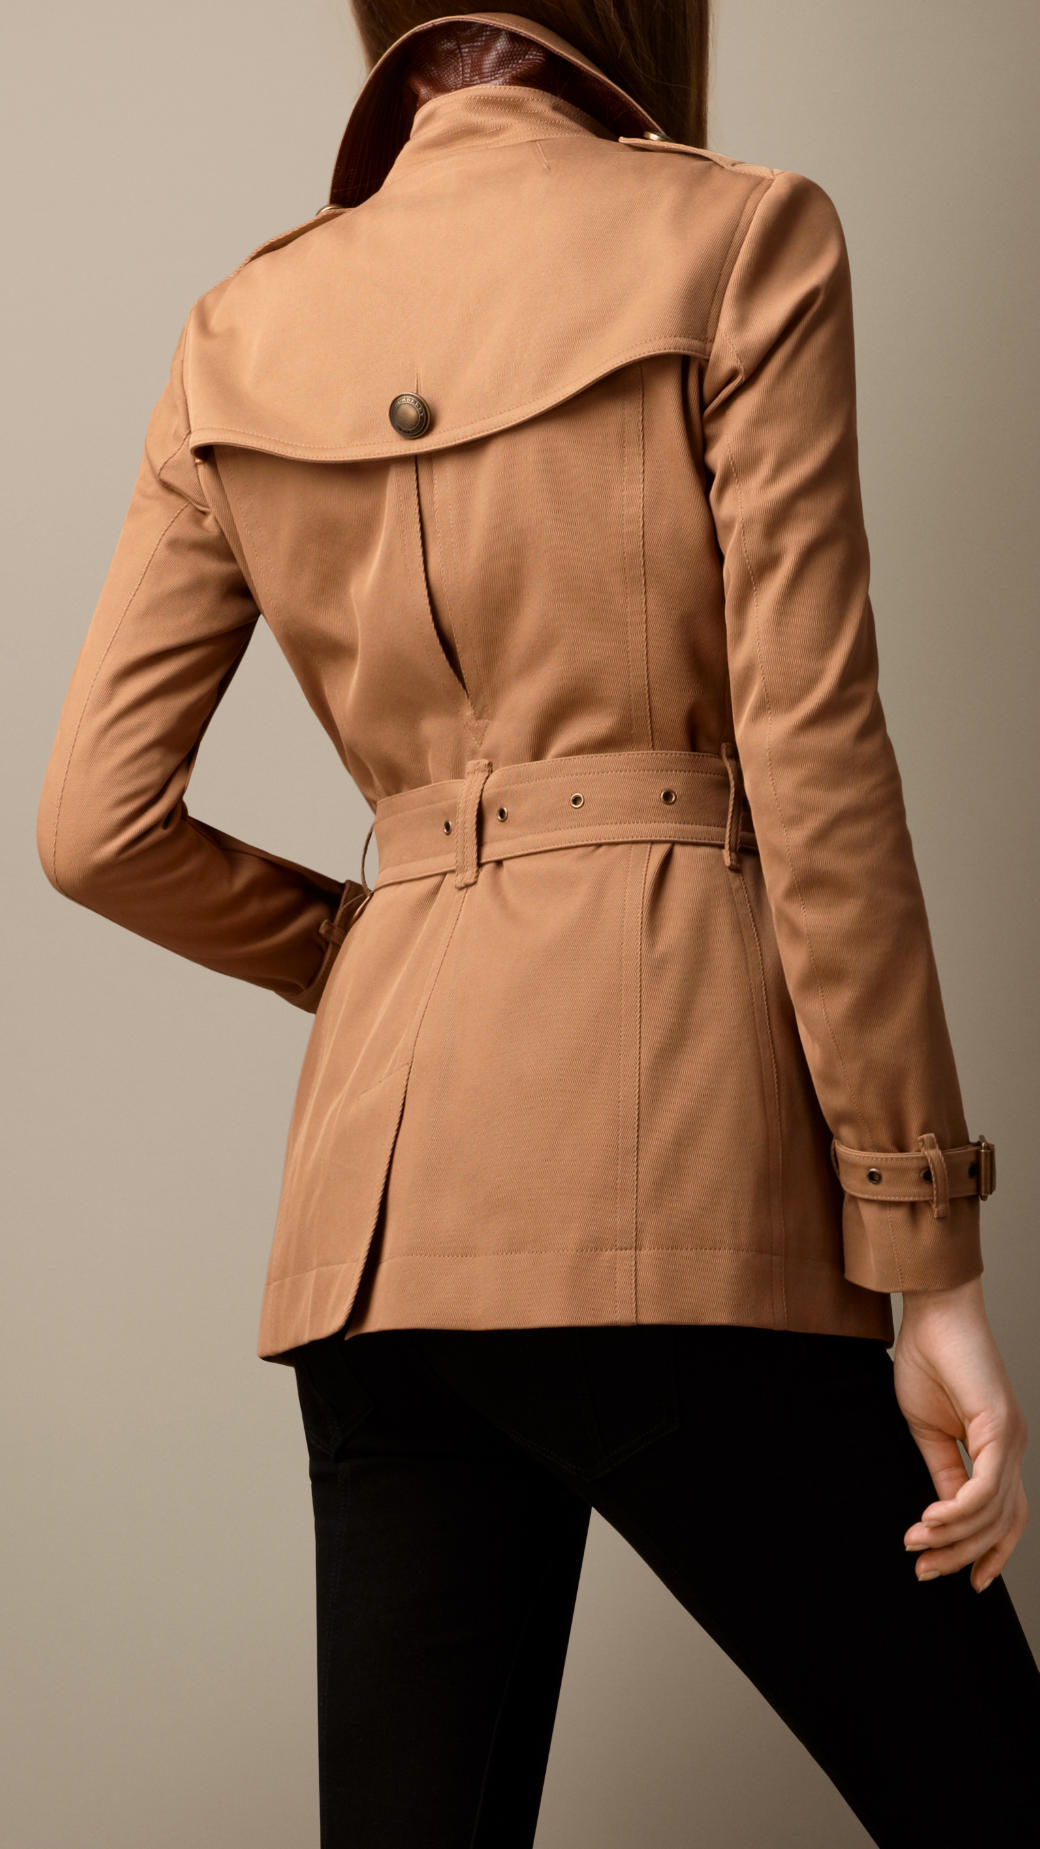 Burberry Short Lizard Detail Trench Coat in Camel (Brown) - Lyst